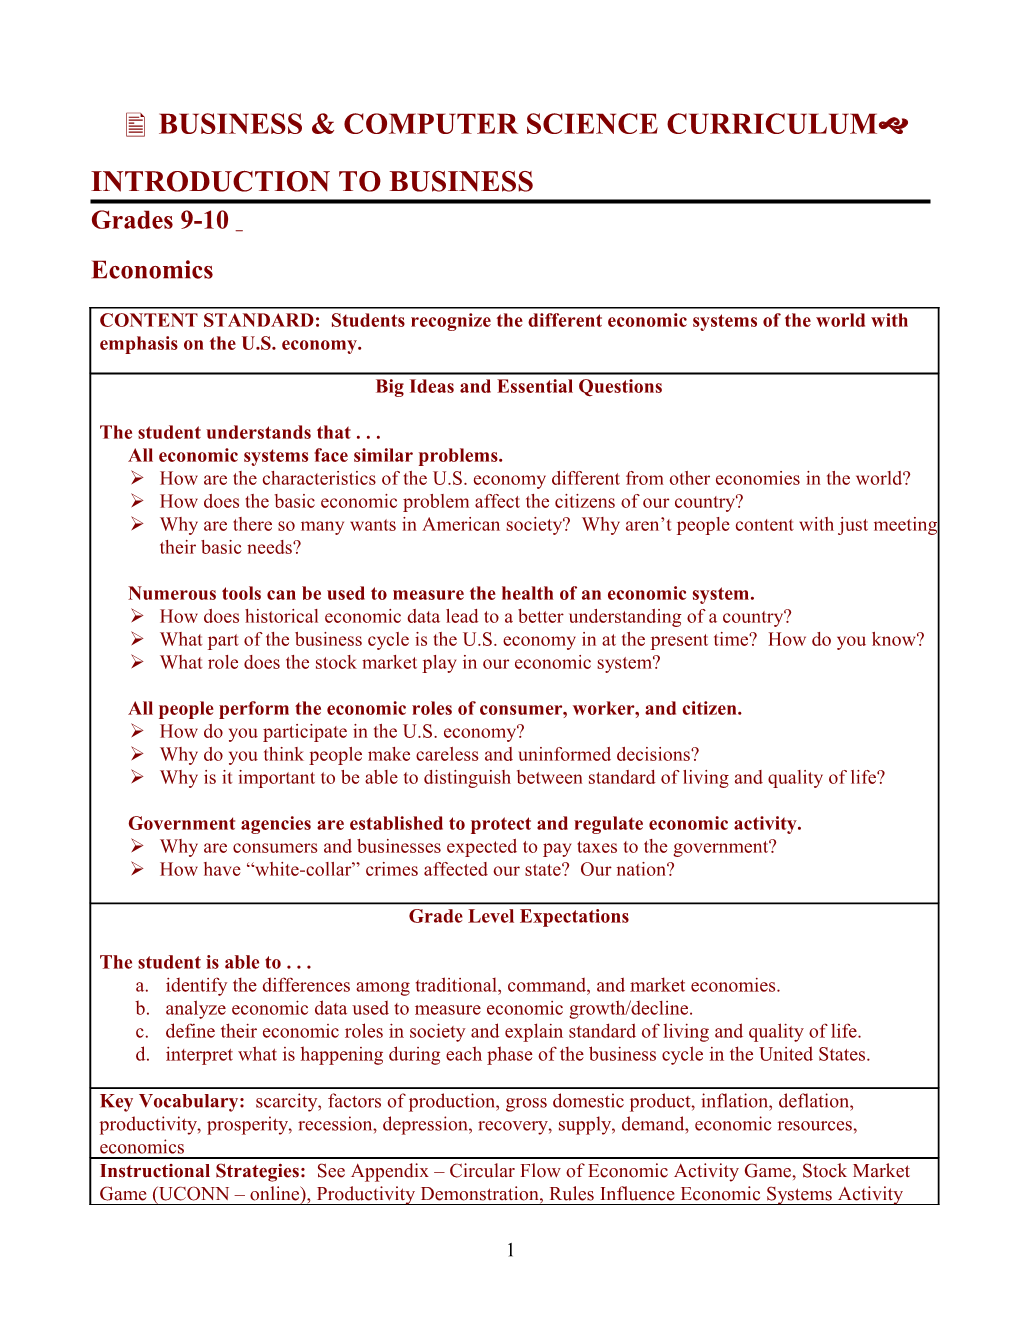 Introduction to Business s3